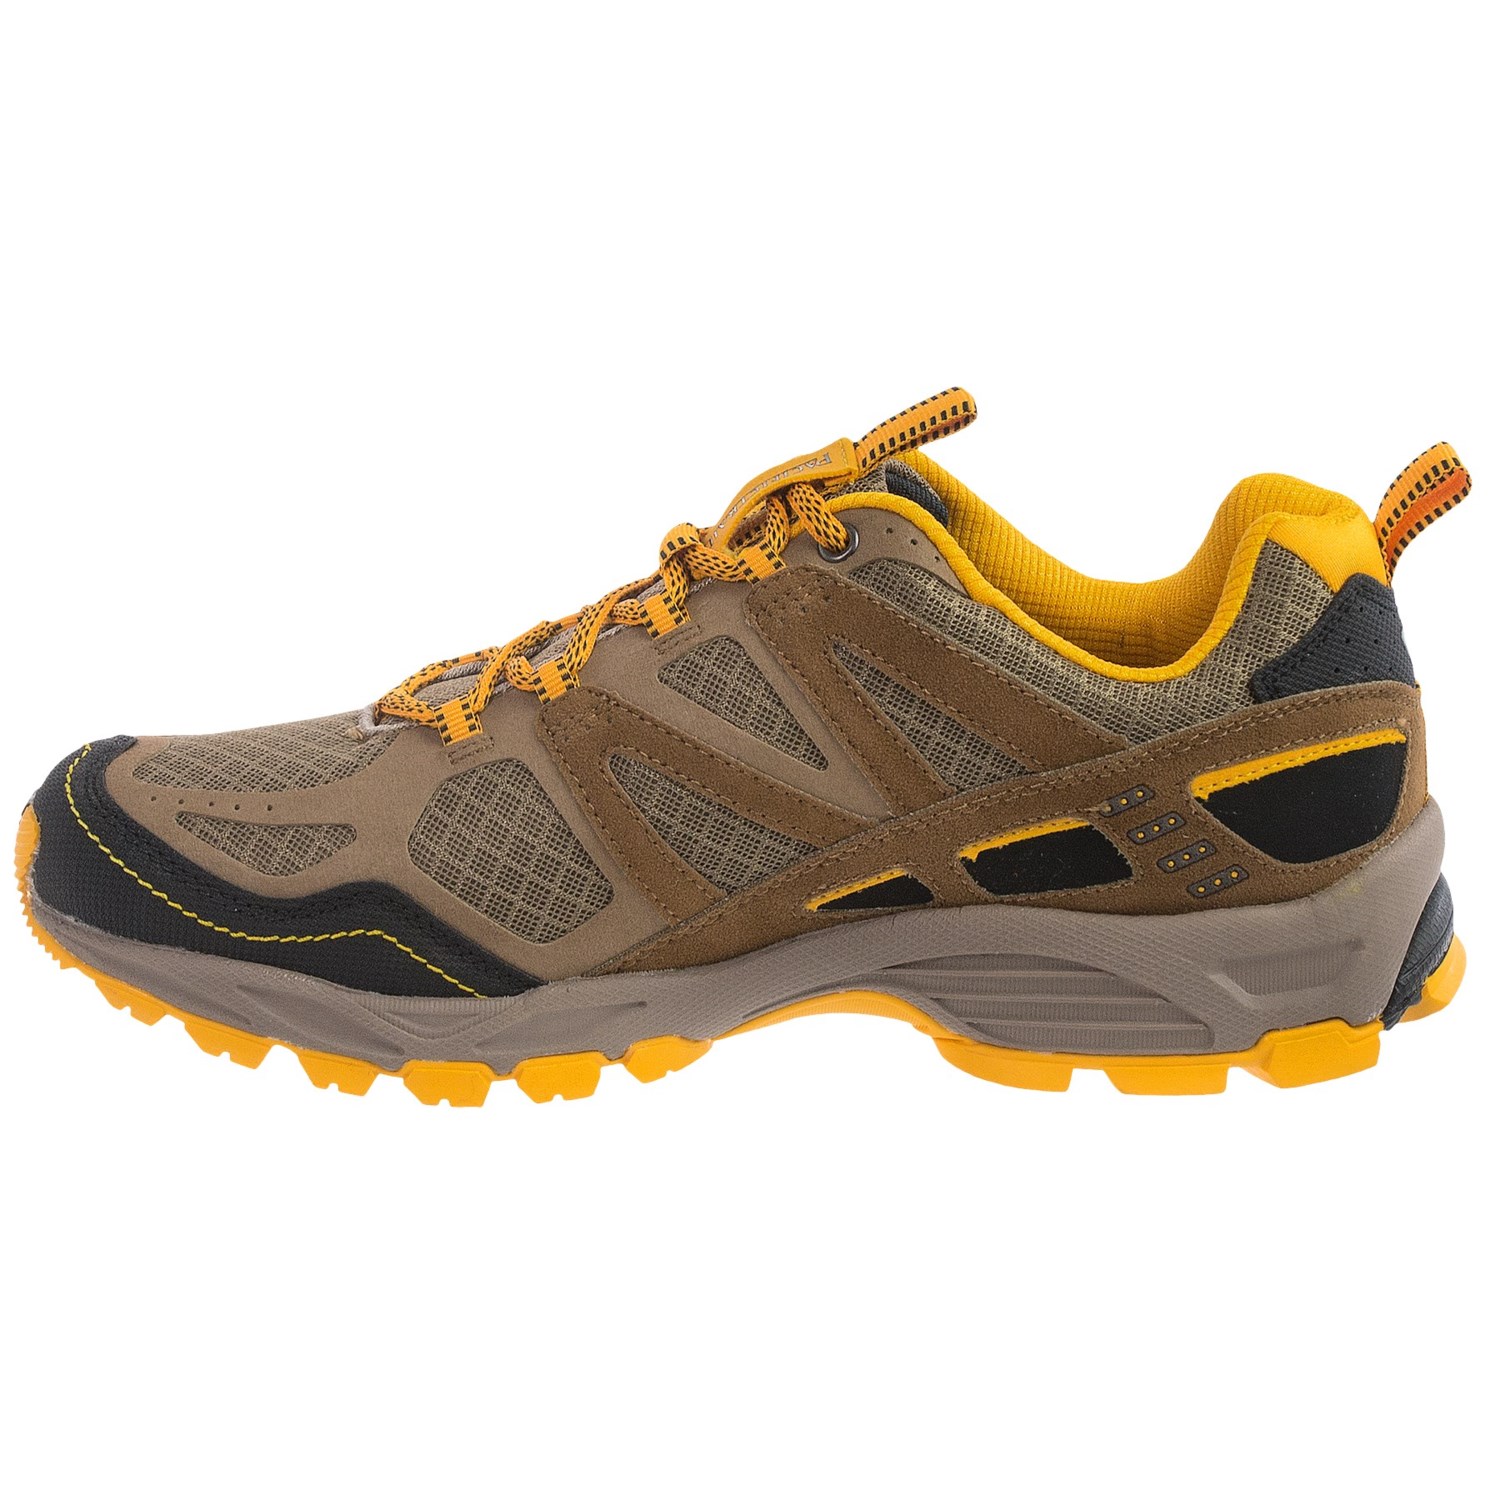 Pacific Trail Tioga Trail Running Shoes (For Men) - Save 50%